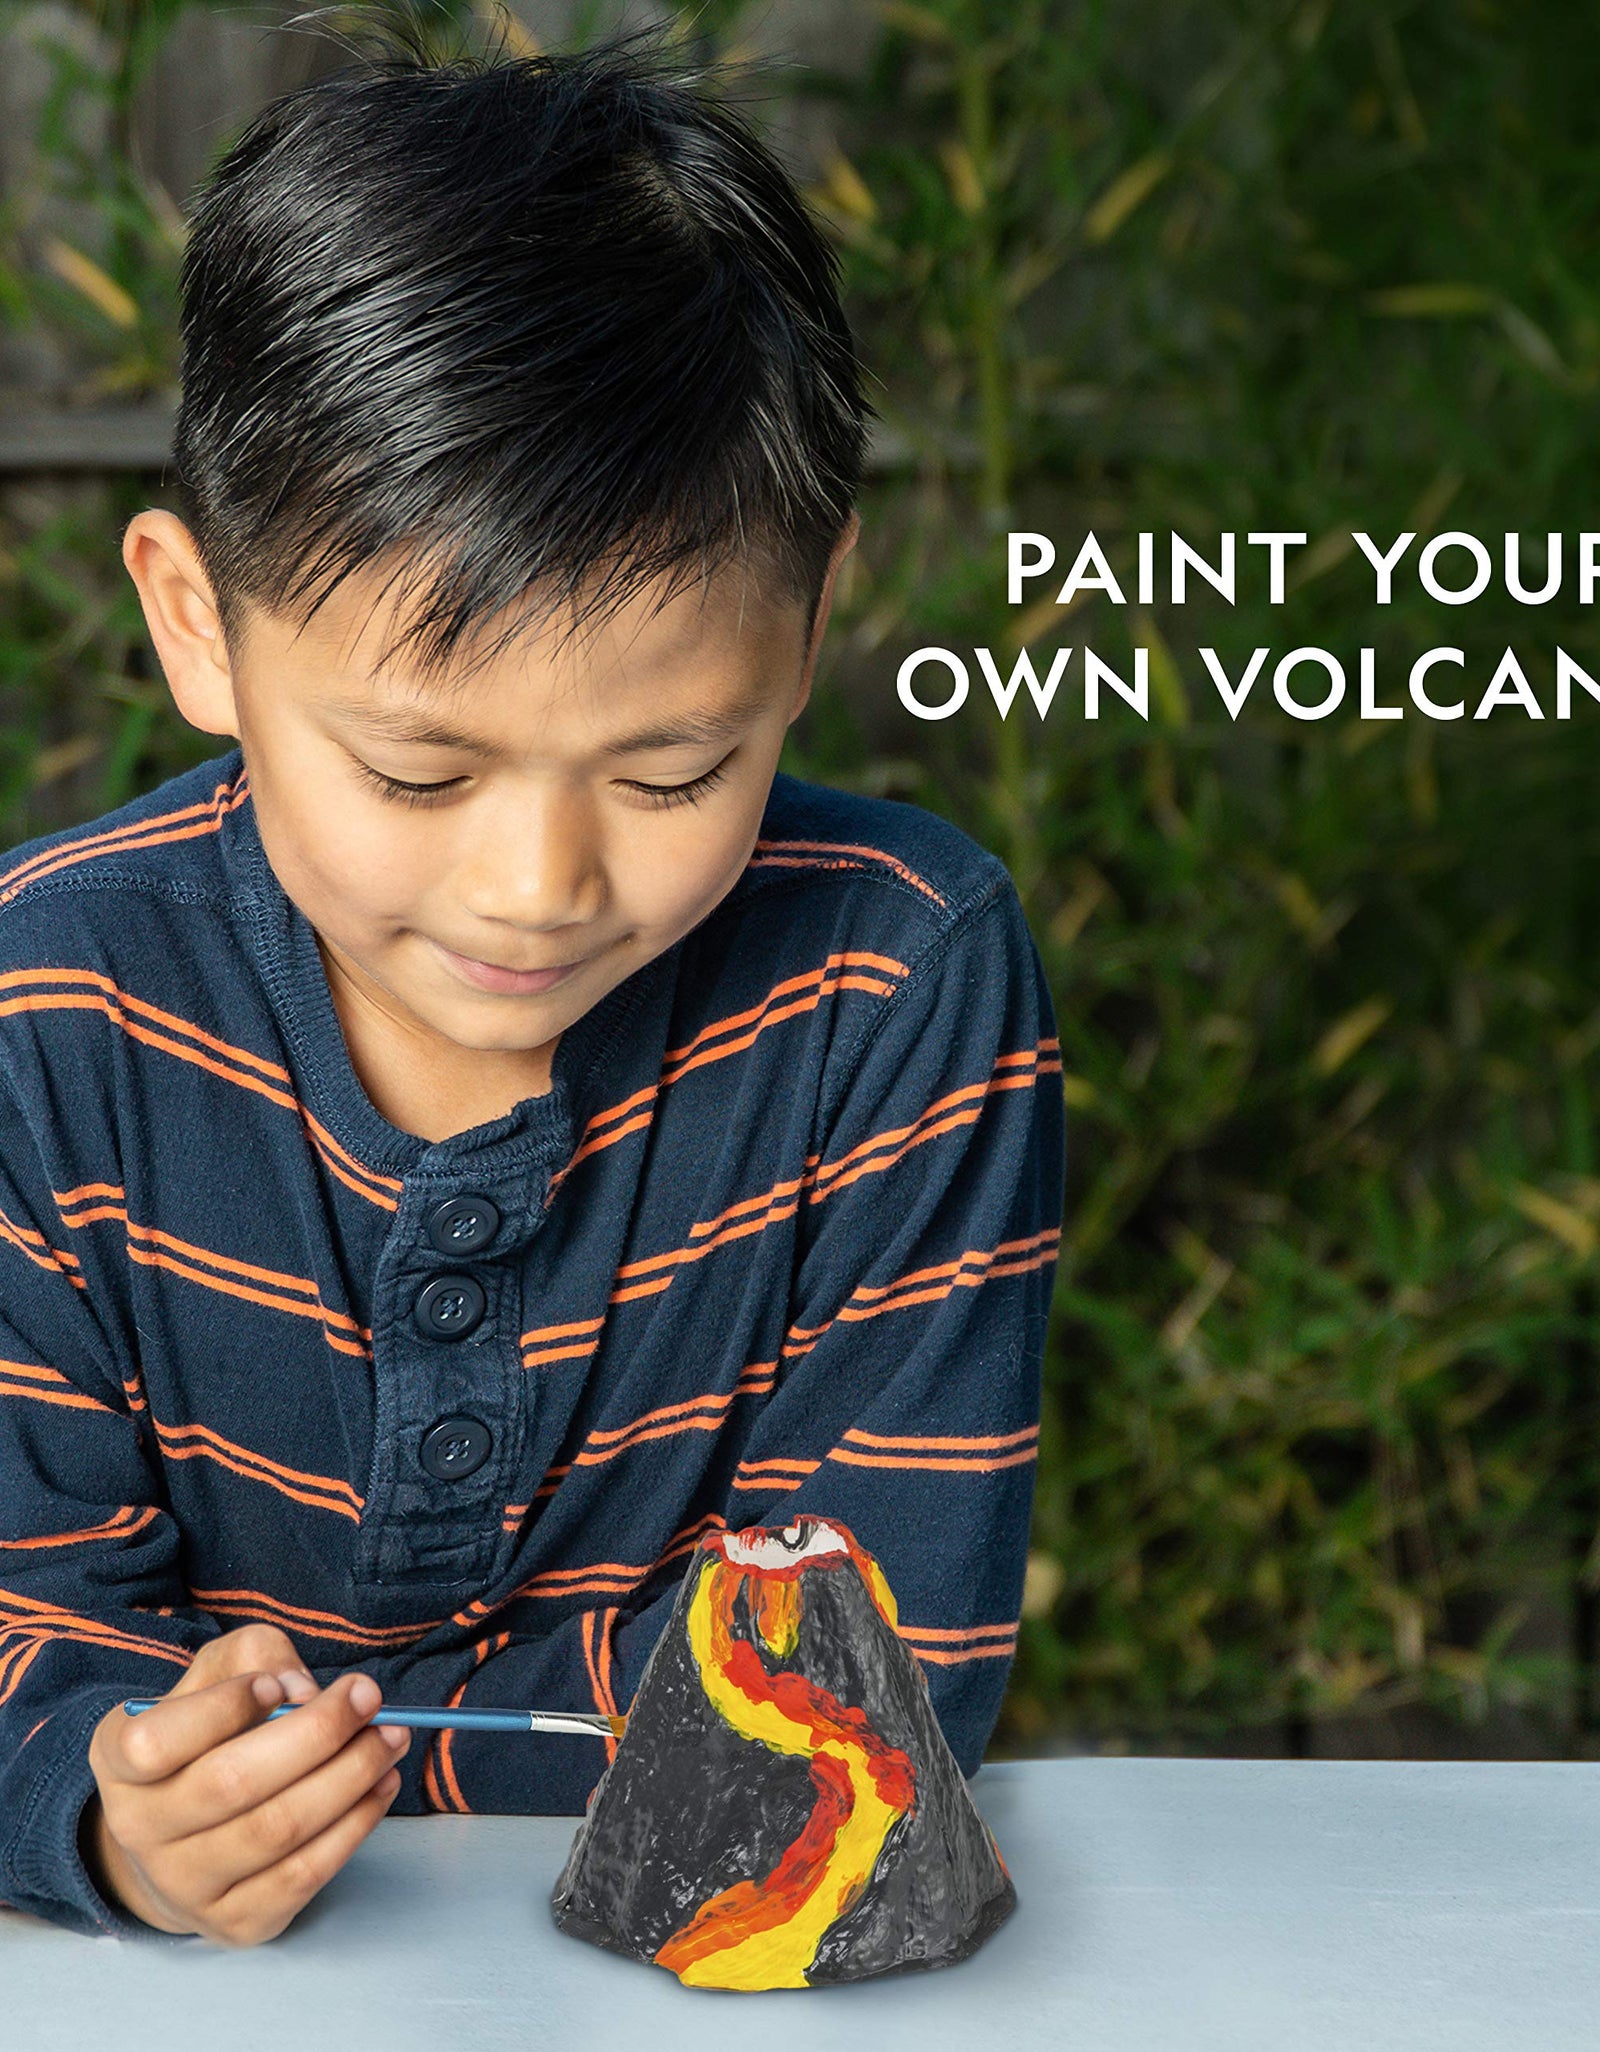 NATIONAL GEOGRAPHIC Ultimate Volcano Kit – Erupting Volcano Science Kit for Kids, 3X More Eruptions, Pop Crystals Create Exciting Sounds, STEM Science & Educational Toys Make Great Kids Activities